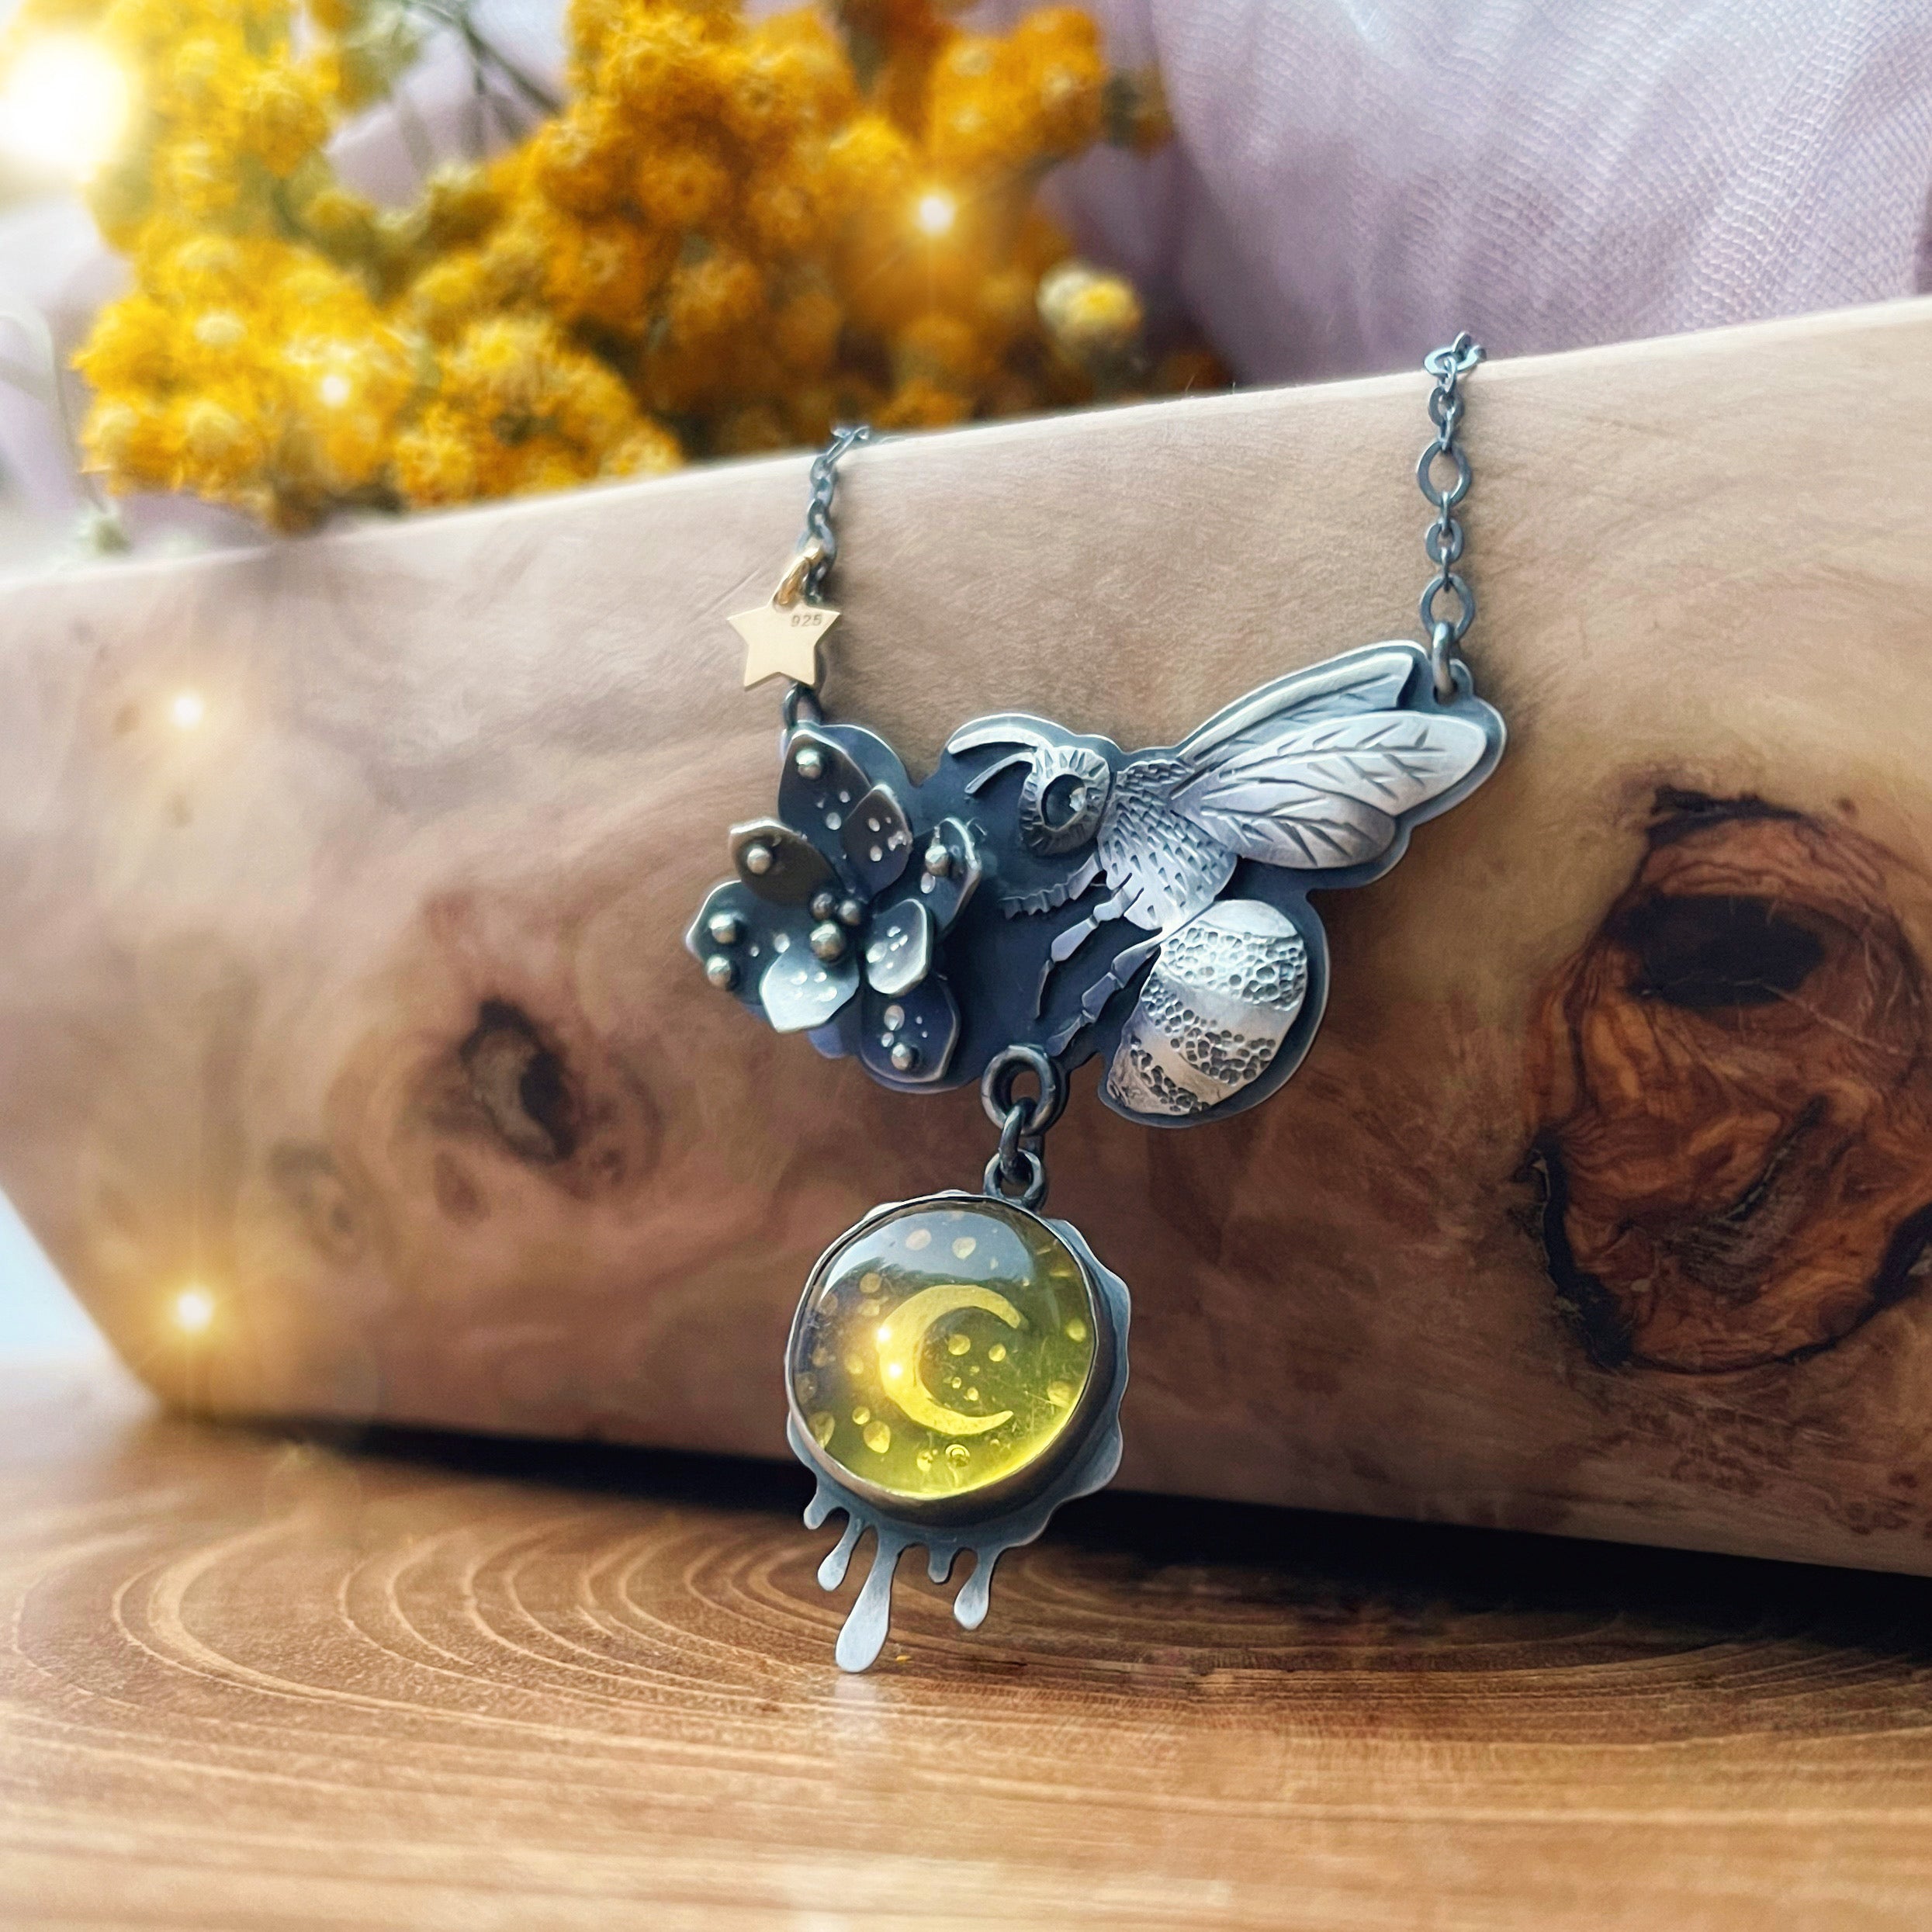 The Night Bee Necklace with Baltic Amber